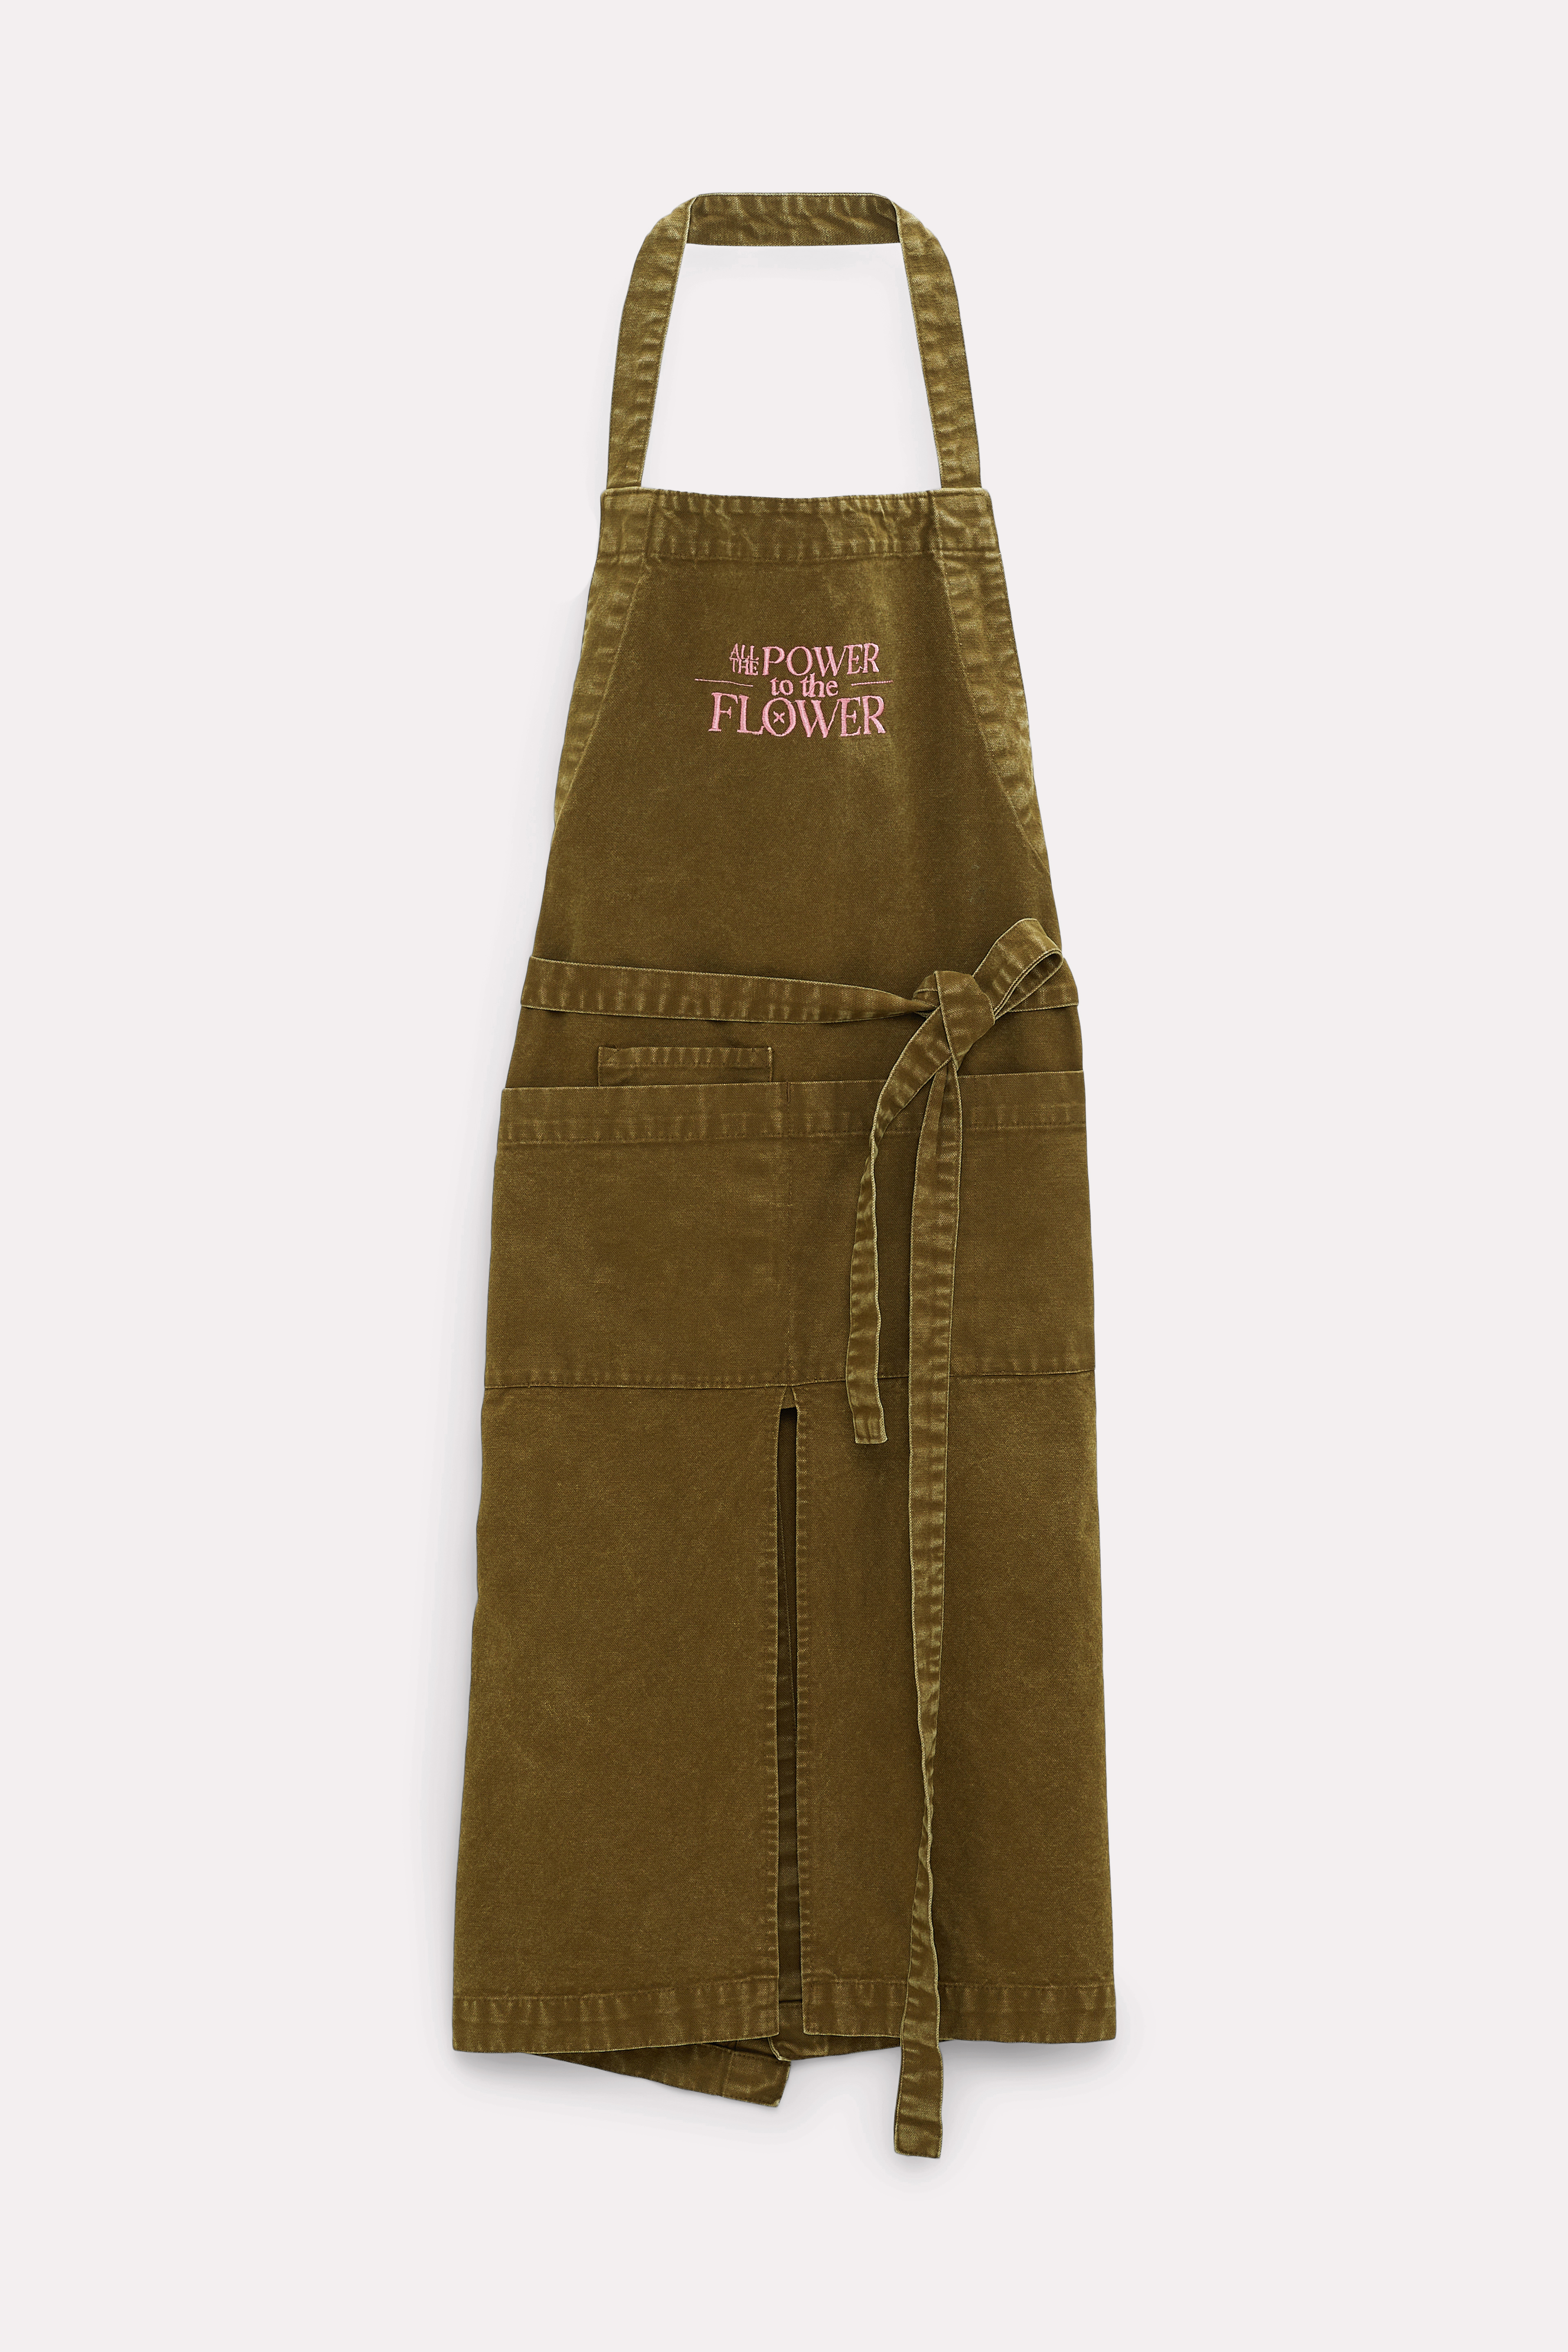 Dorothee Schumacher Gardening Apron With Embroidery In Green